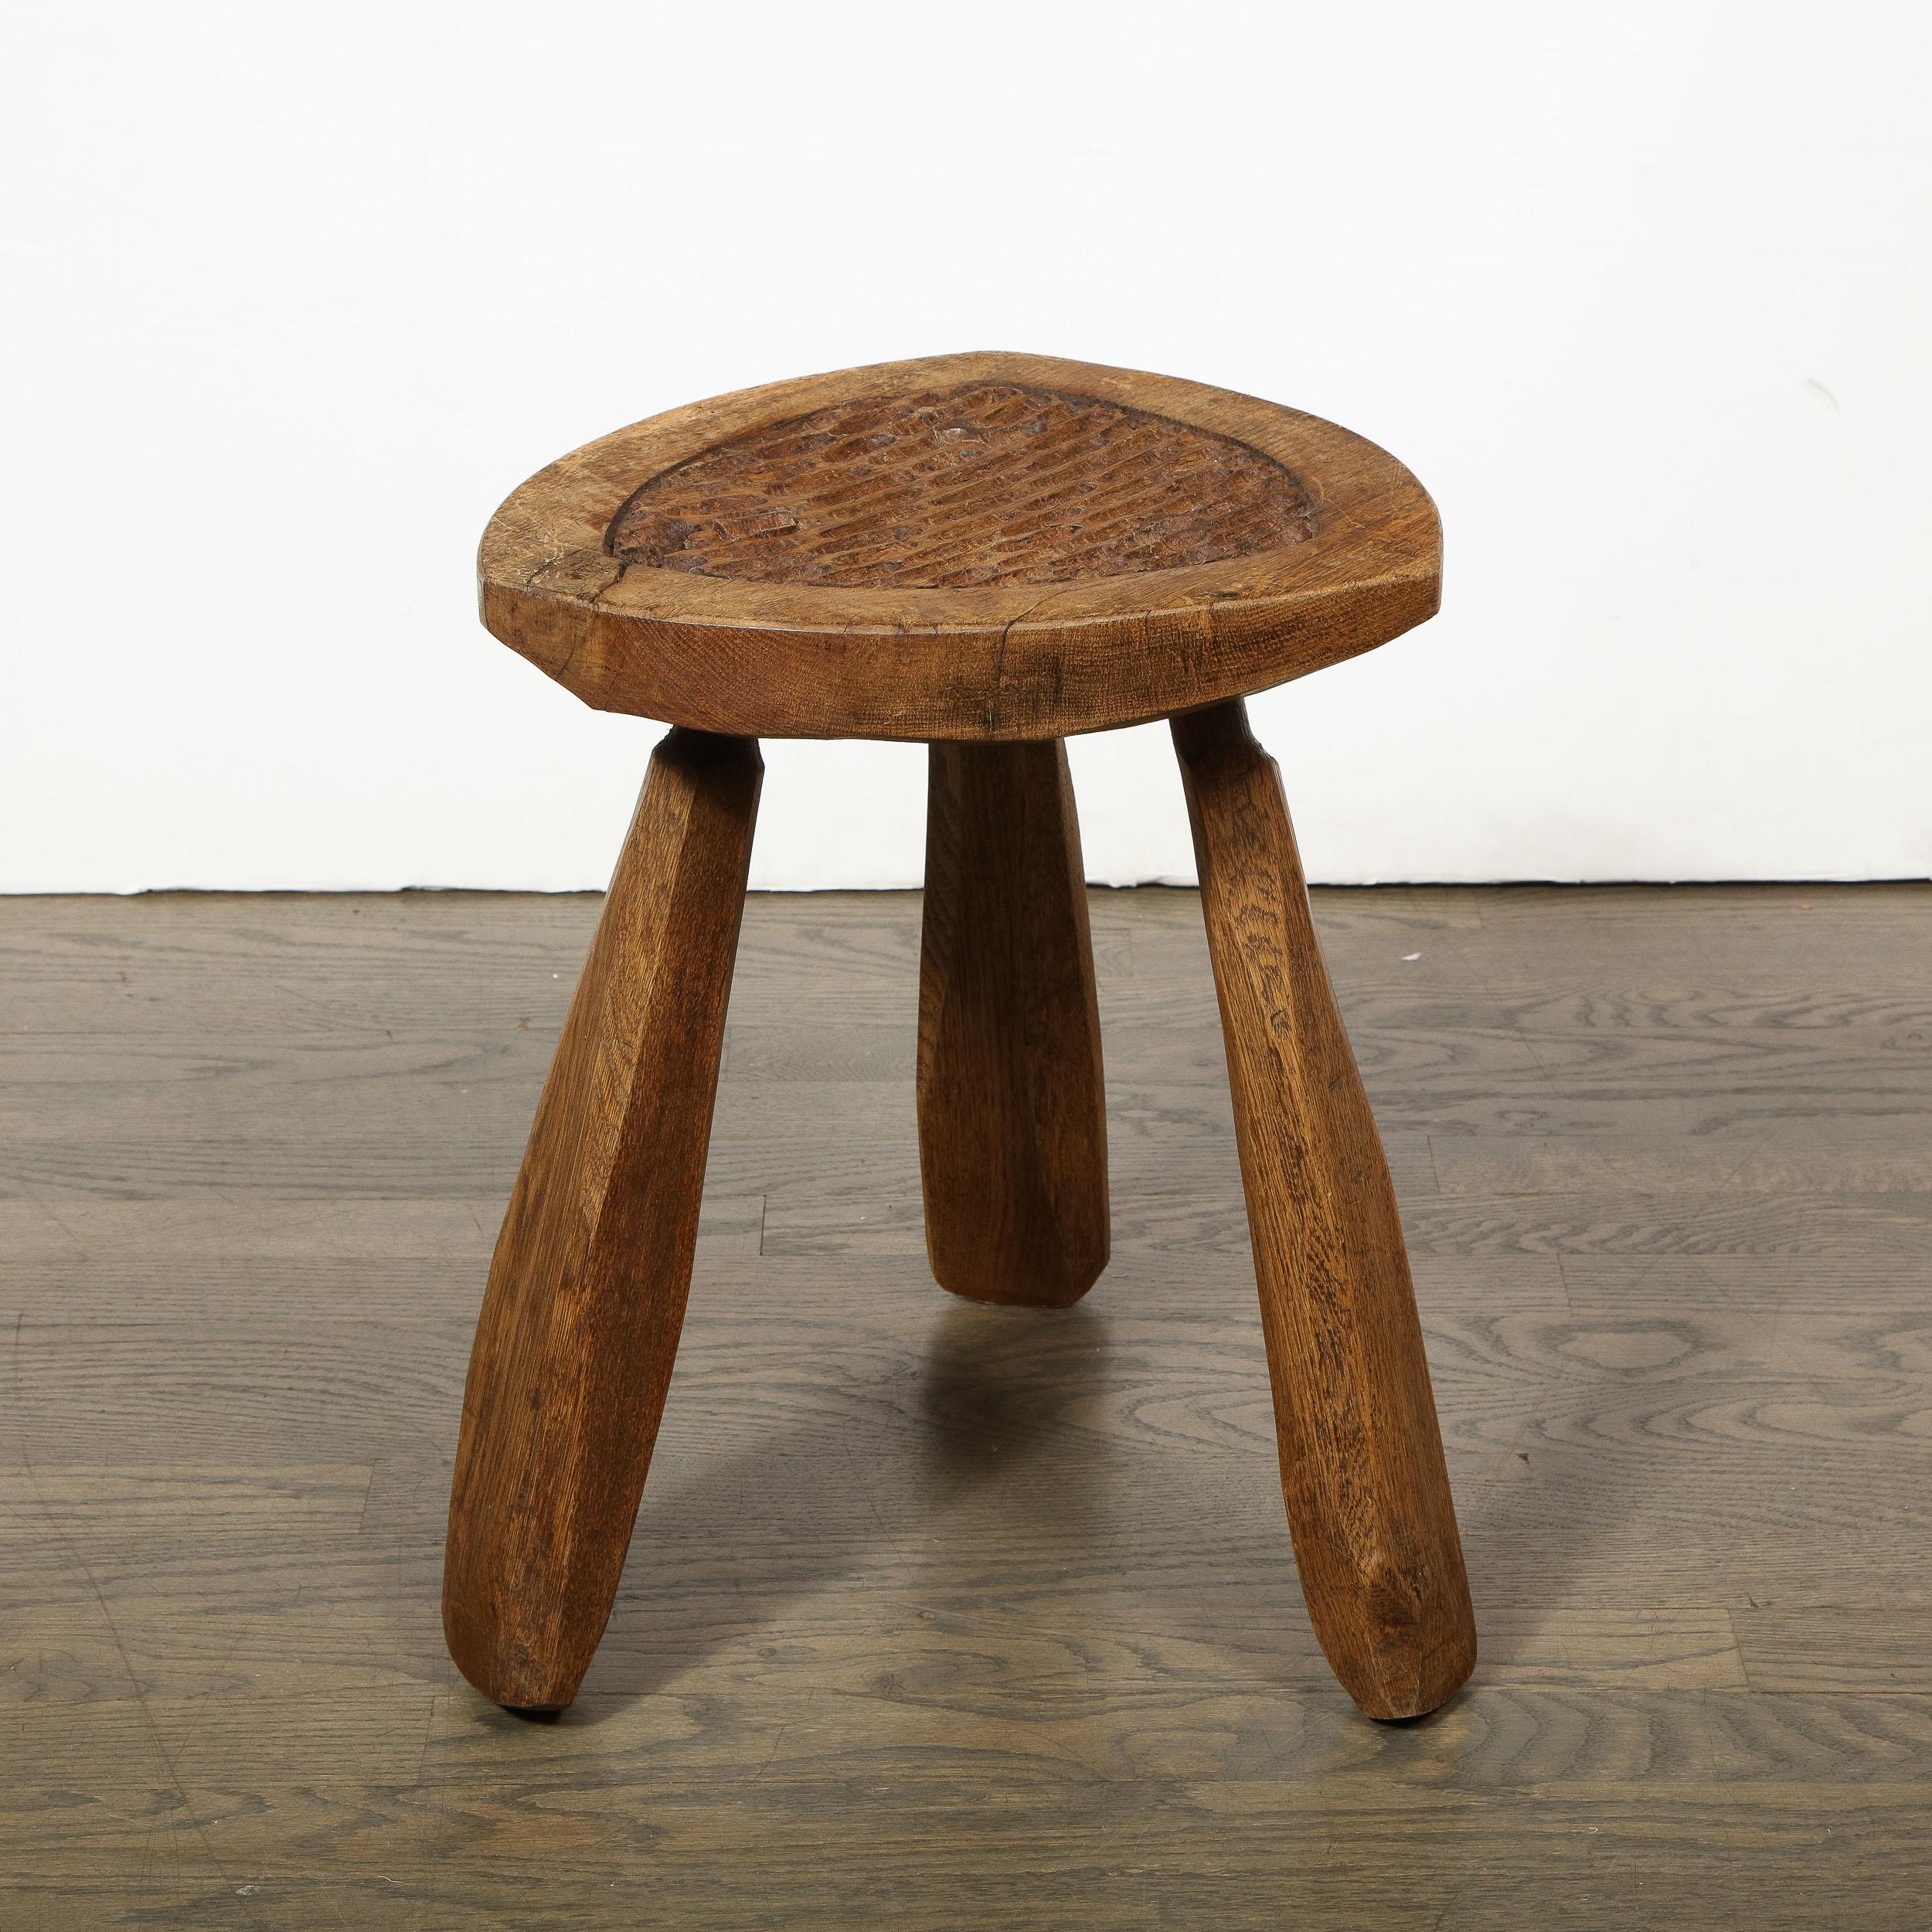 This refined and sophisticated Mid-Century Modern Brutalist stool was realized in France, circa 1950. It offers stylized shield form seats with rounded corners- a patently handcrafted form- with incised centres offering a wealth of carved ovoid